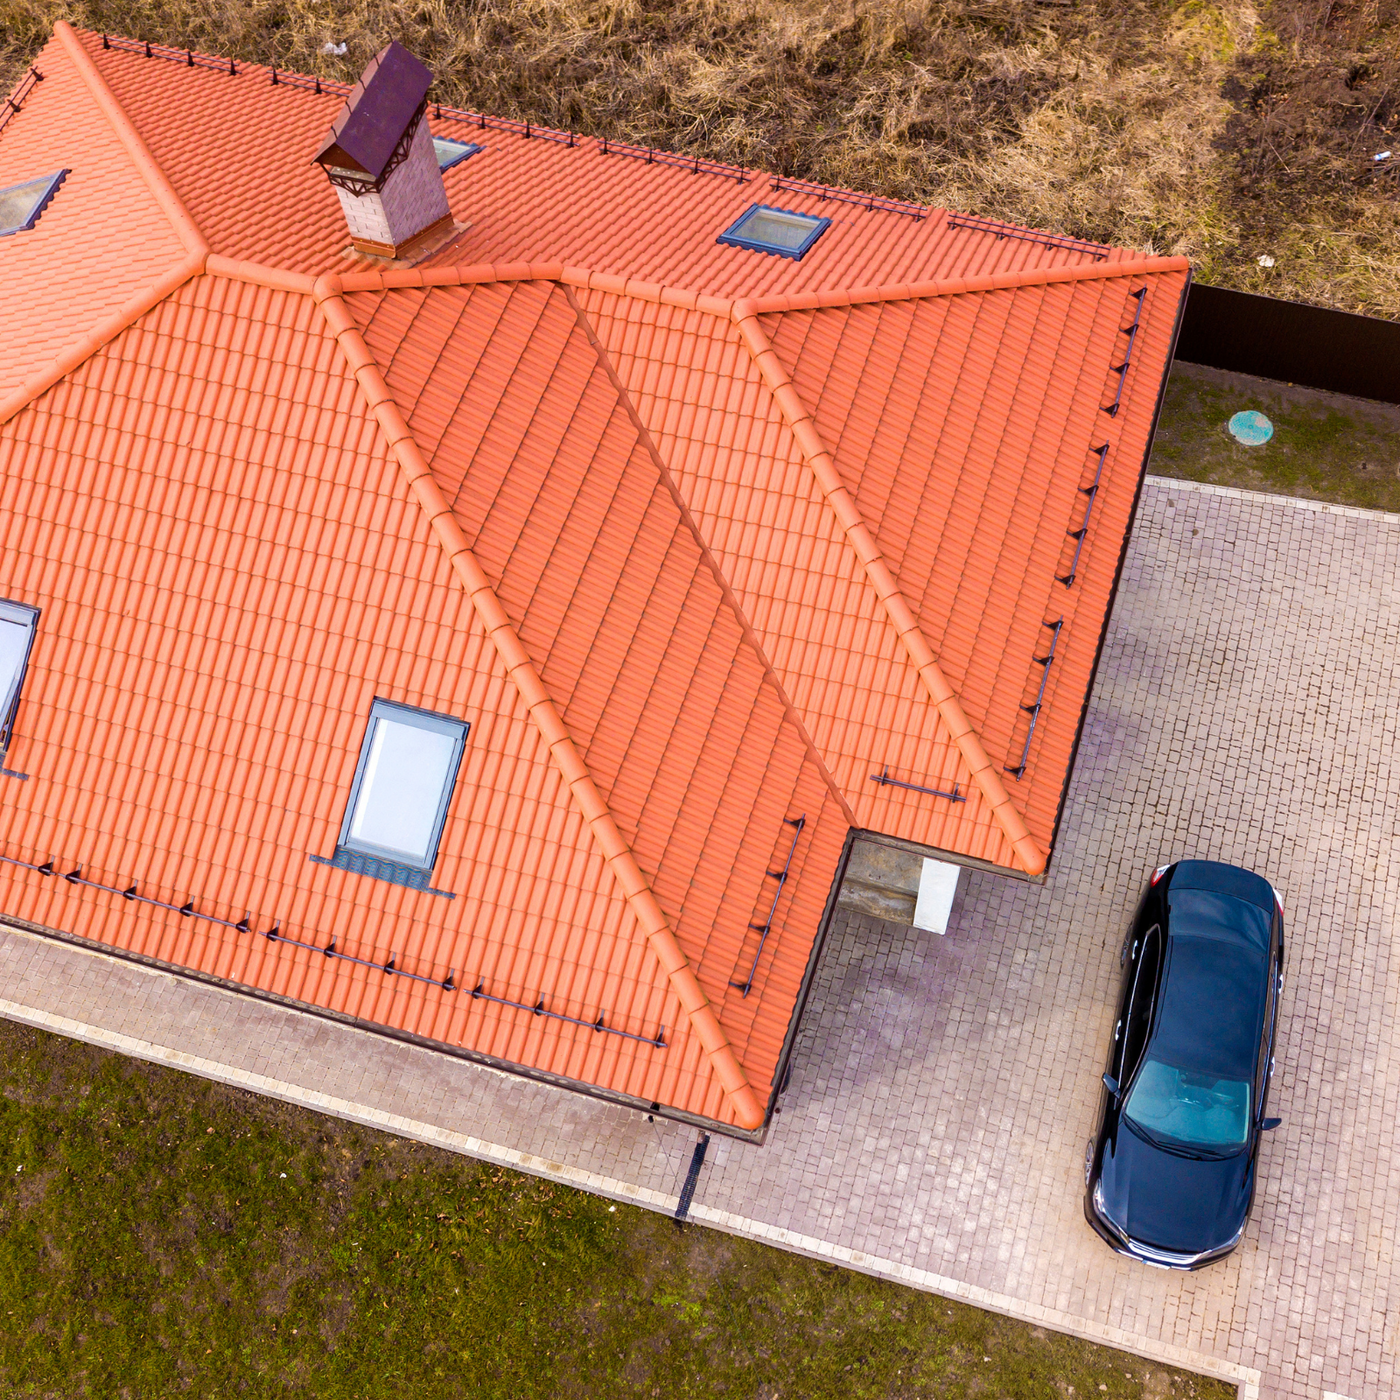 Drones are changing the roof inspection industry